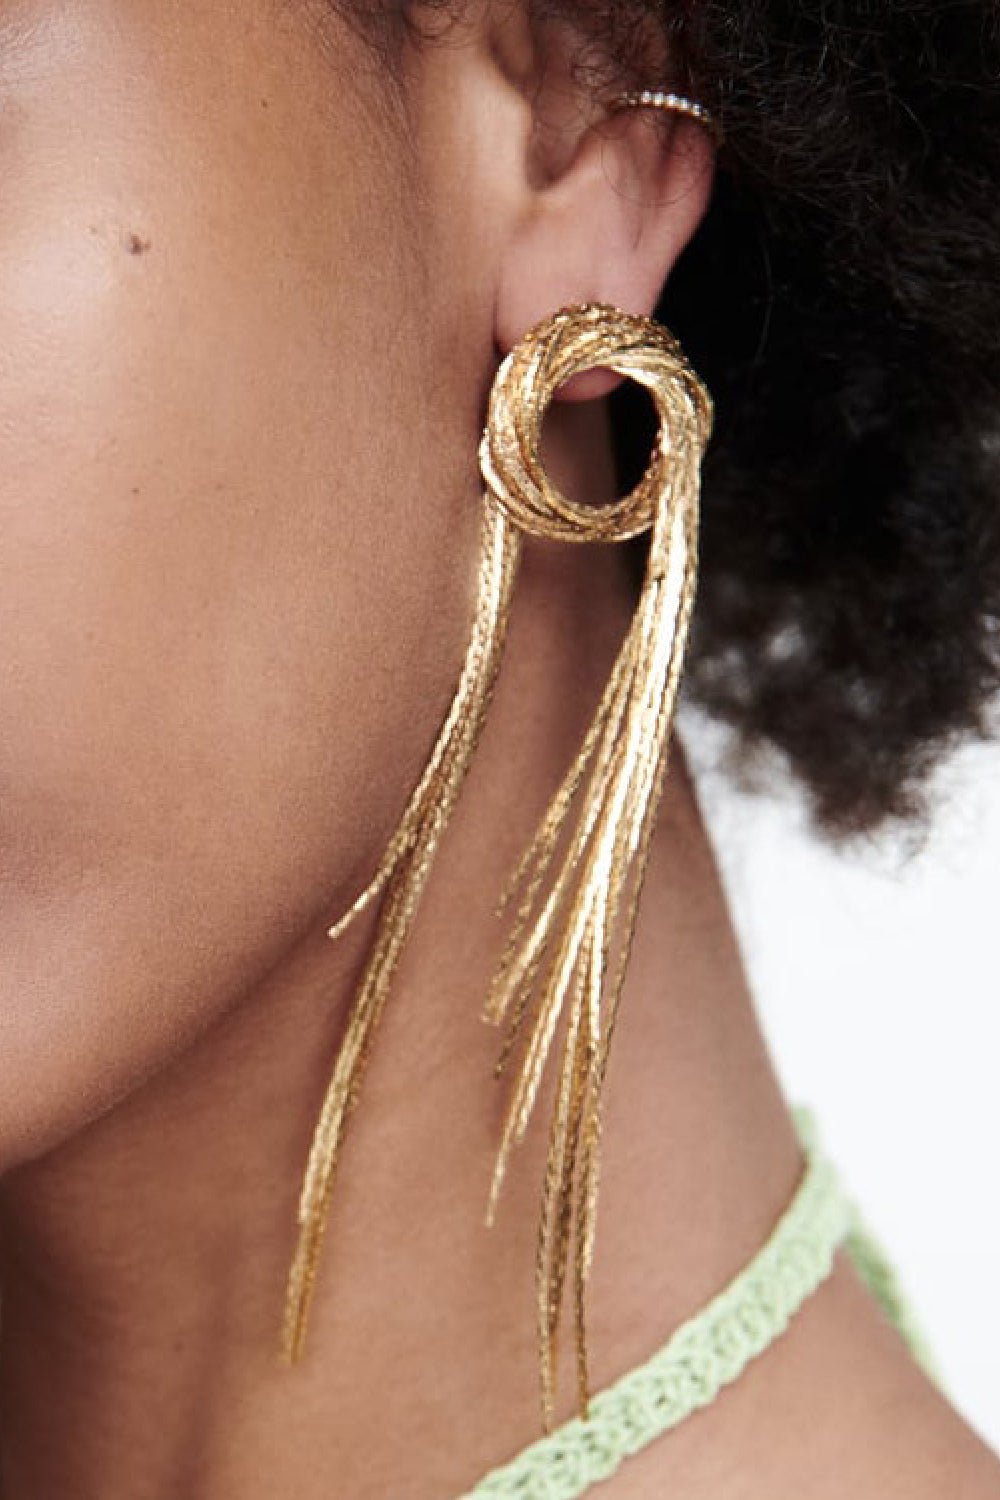 Round Shape Fringed Copper Earrings - London's Closet Boutique